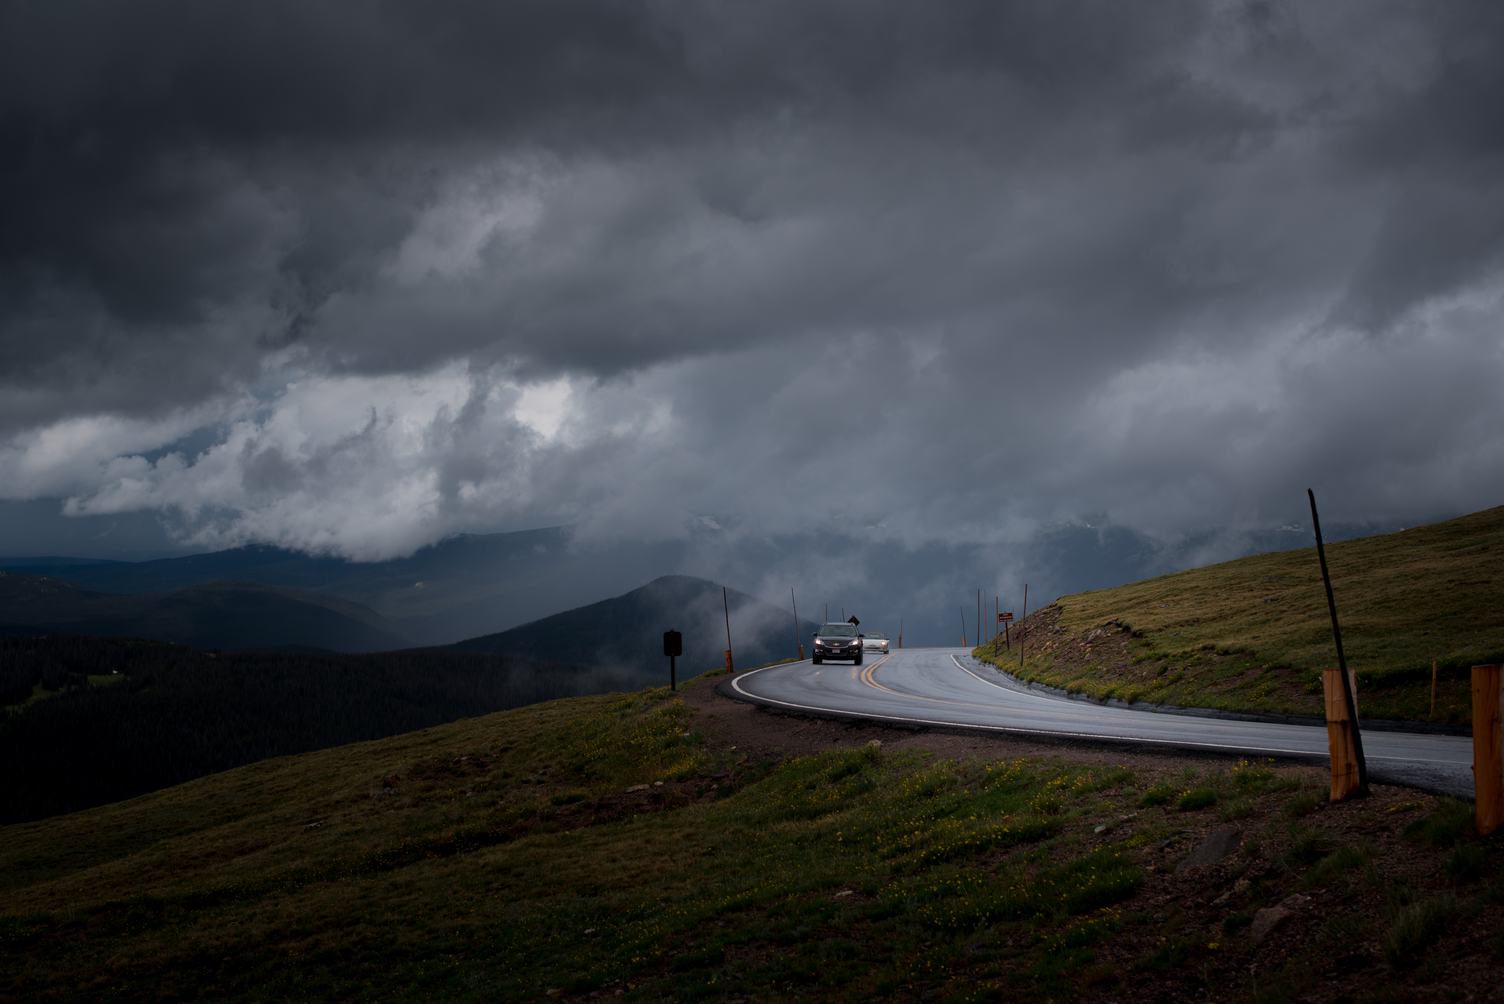 Curved Asphalt Road in a Mountainous Landscape before Storm